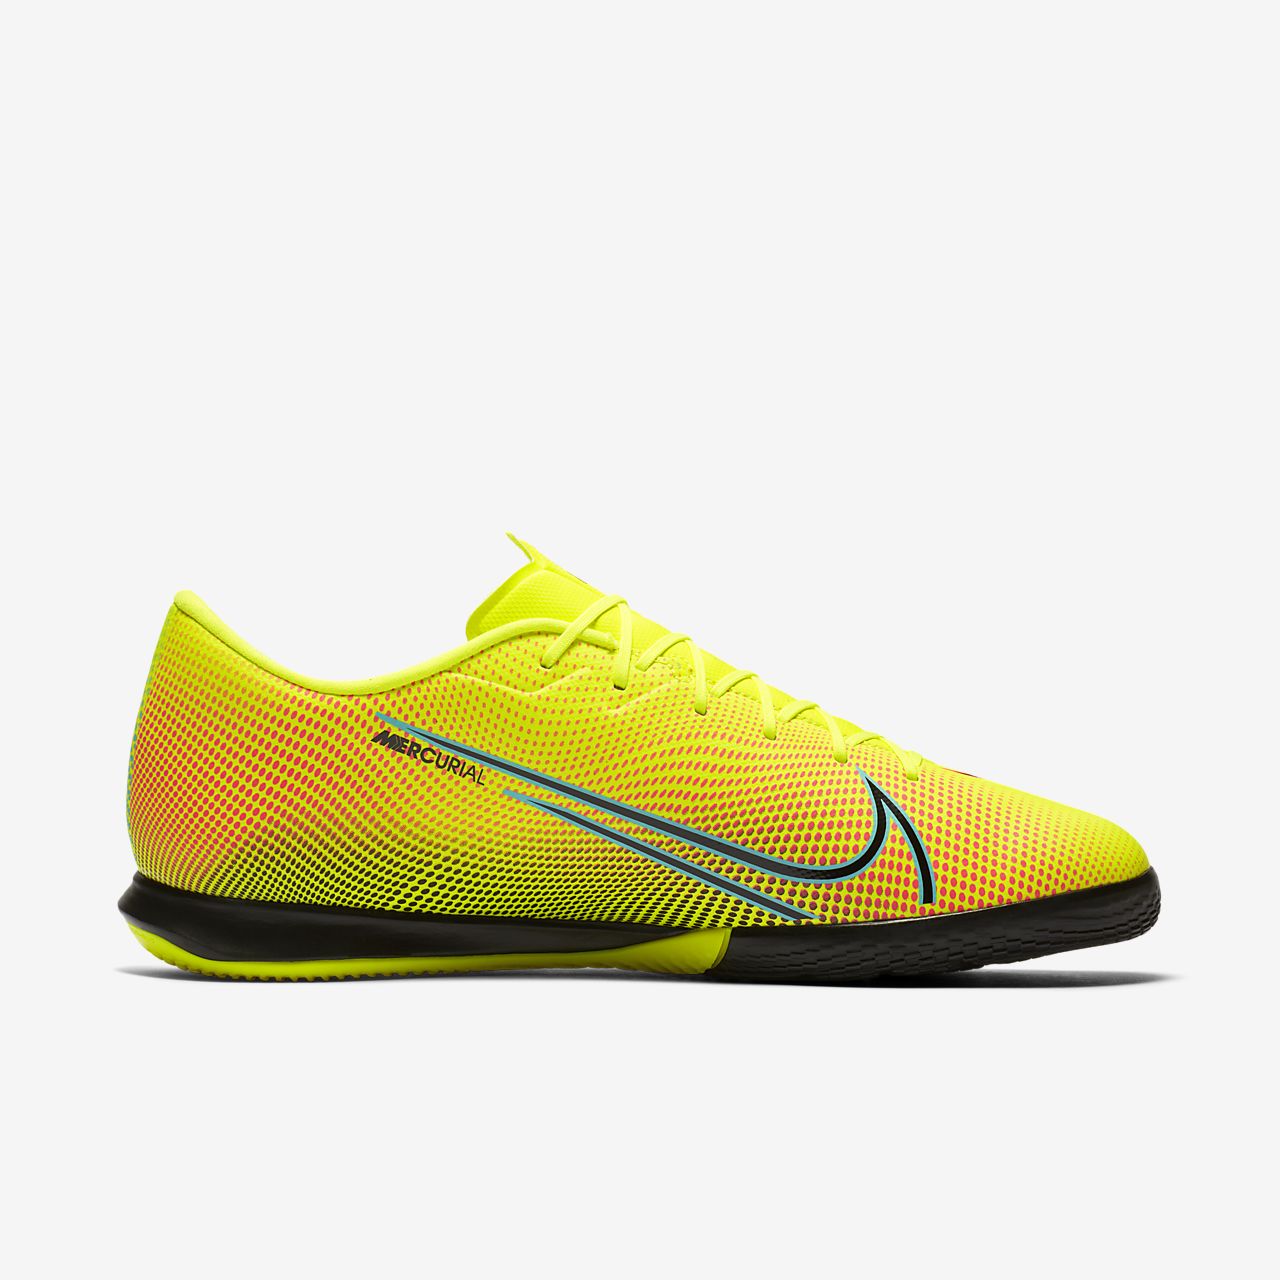 Buy Nike Mercurial Vapor 13 Pro Turf Only $ 48 Today.